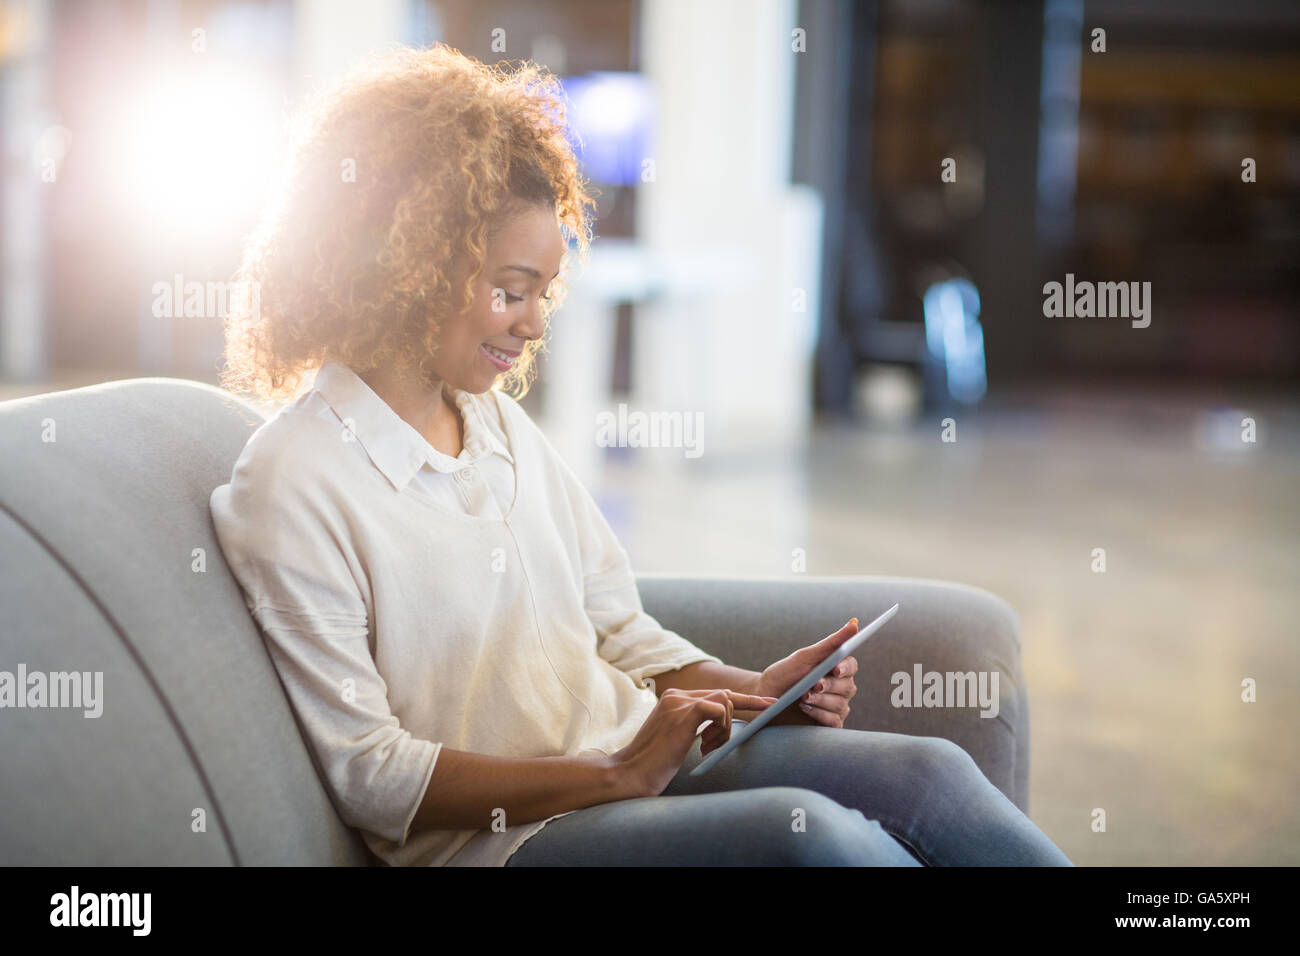 Woman using digital tablet in office Banque D'Images